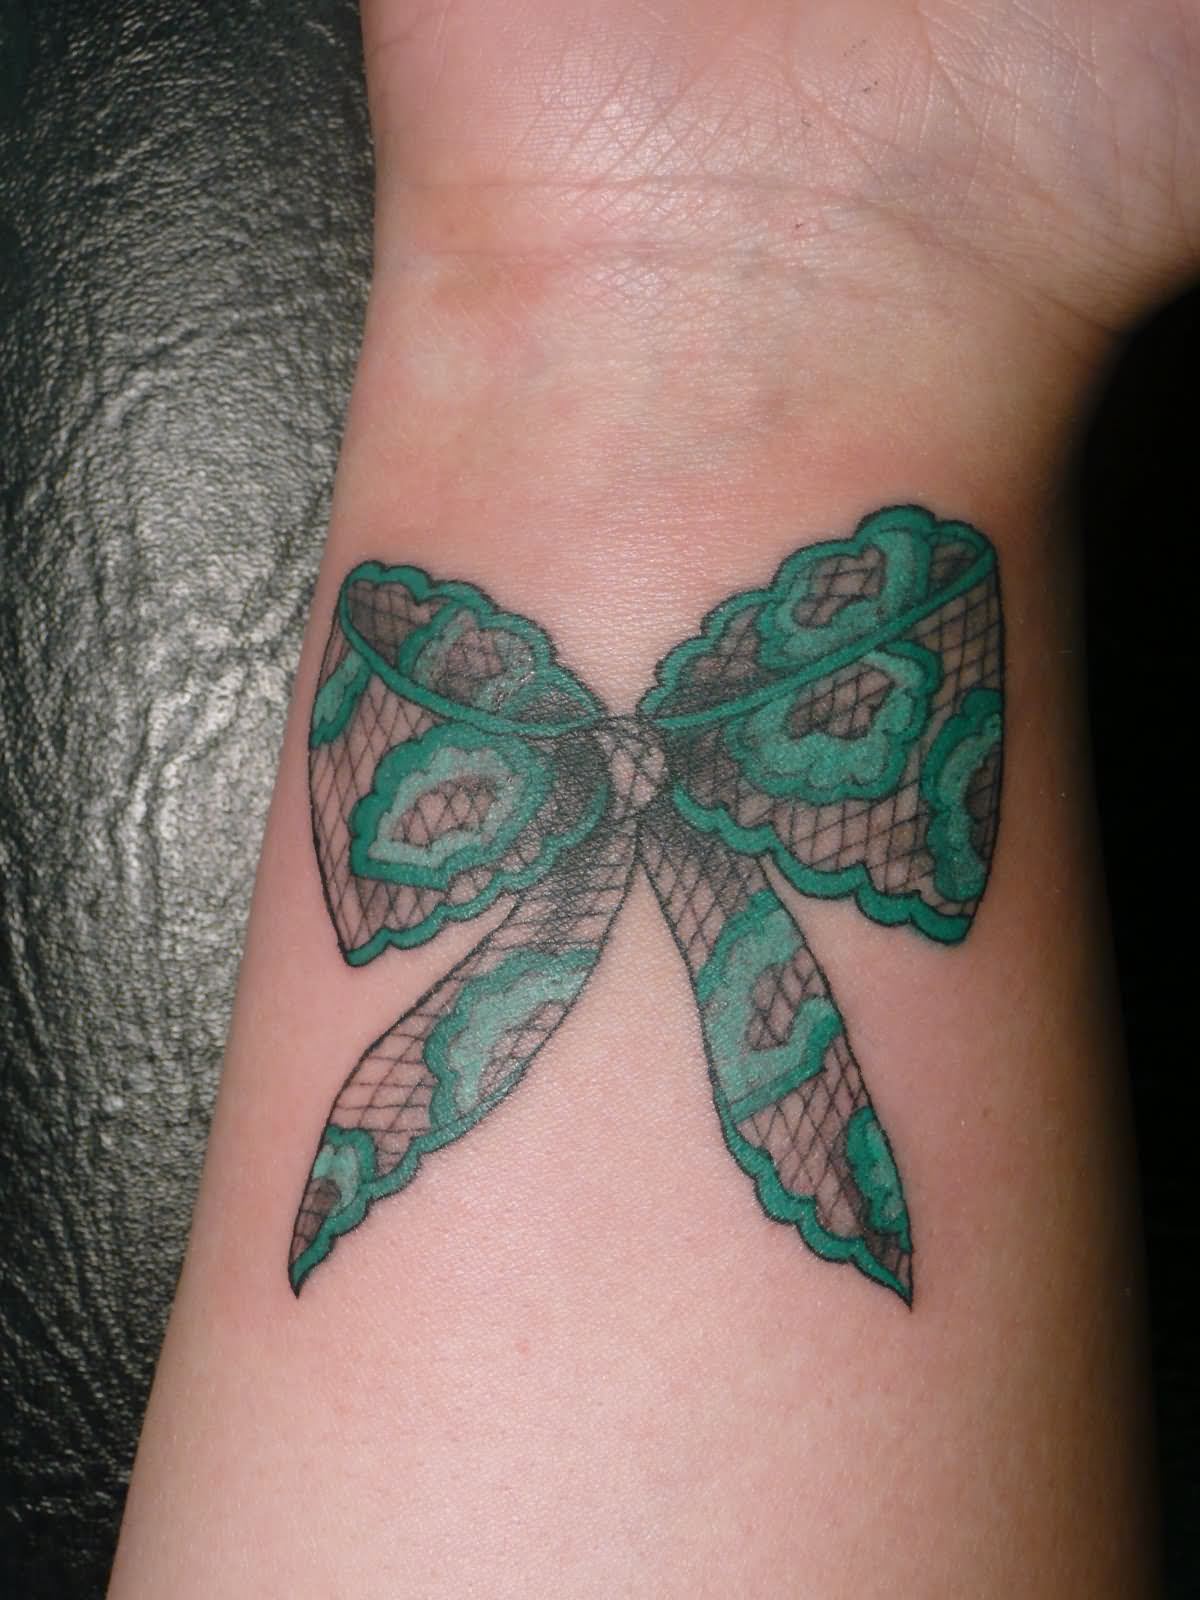 Awesome Ribbon Bow Tattoo Design For Wrist